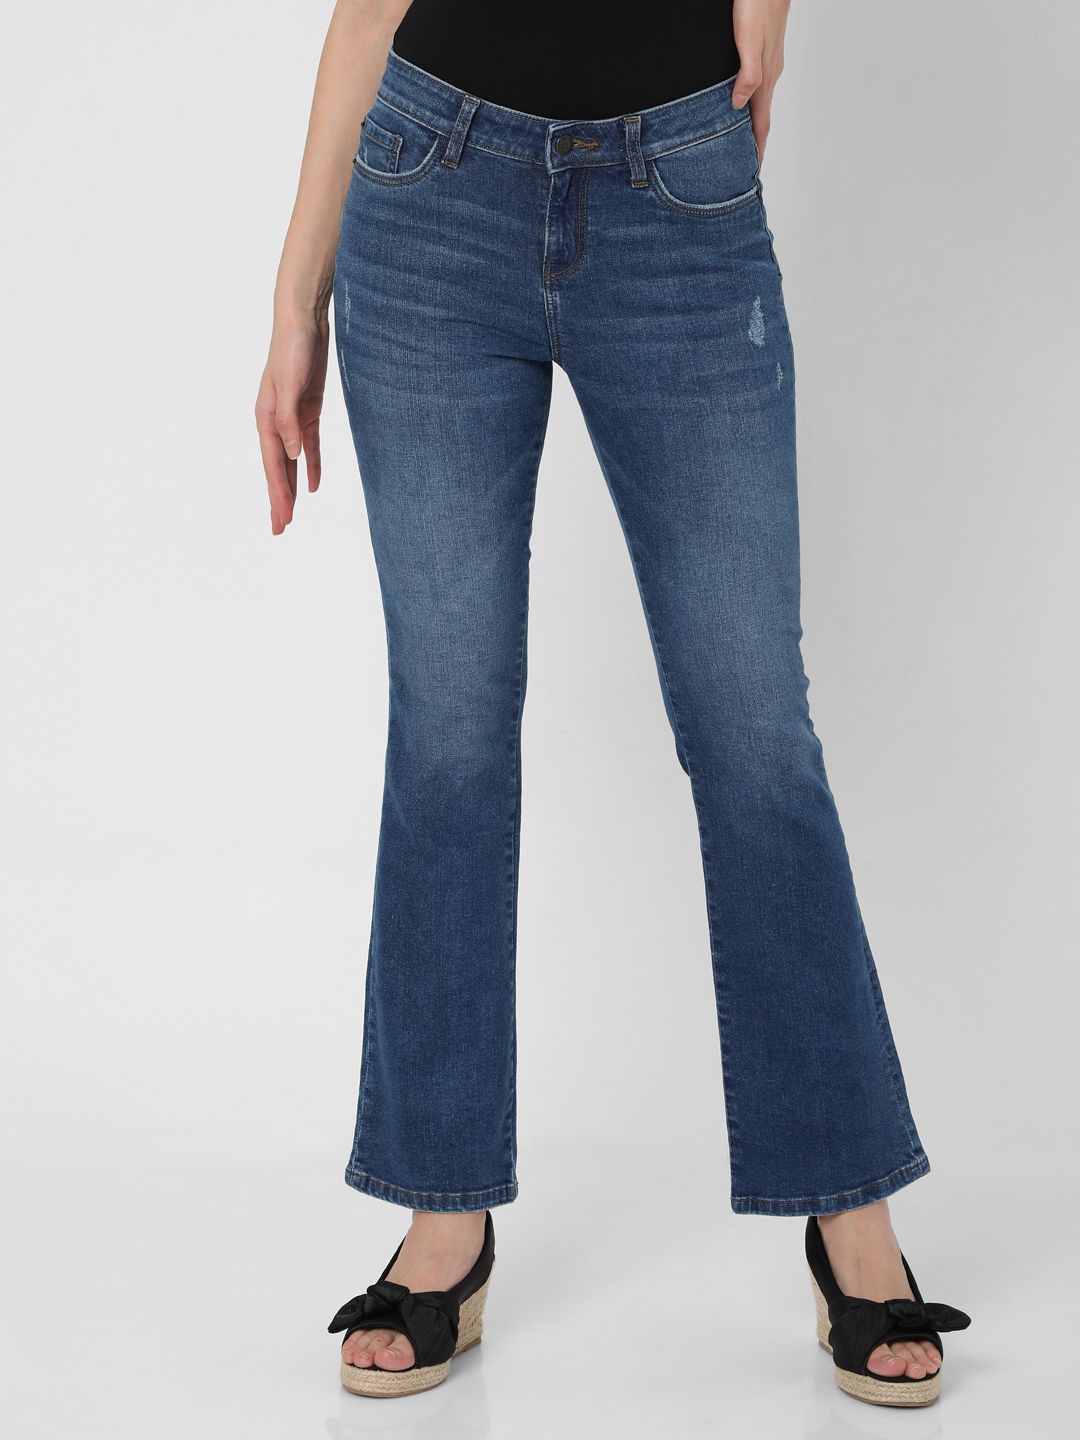 Vero Moda Women Blue Bootcut Low Distress Mid-Rise Light Fade Stretchable Jeans Price in India